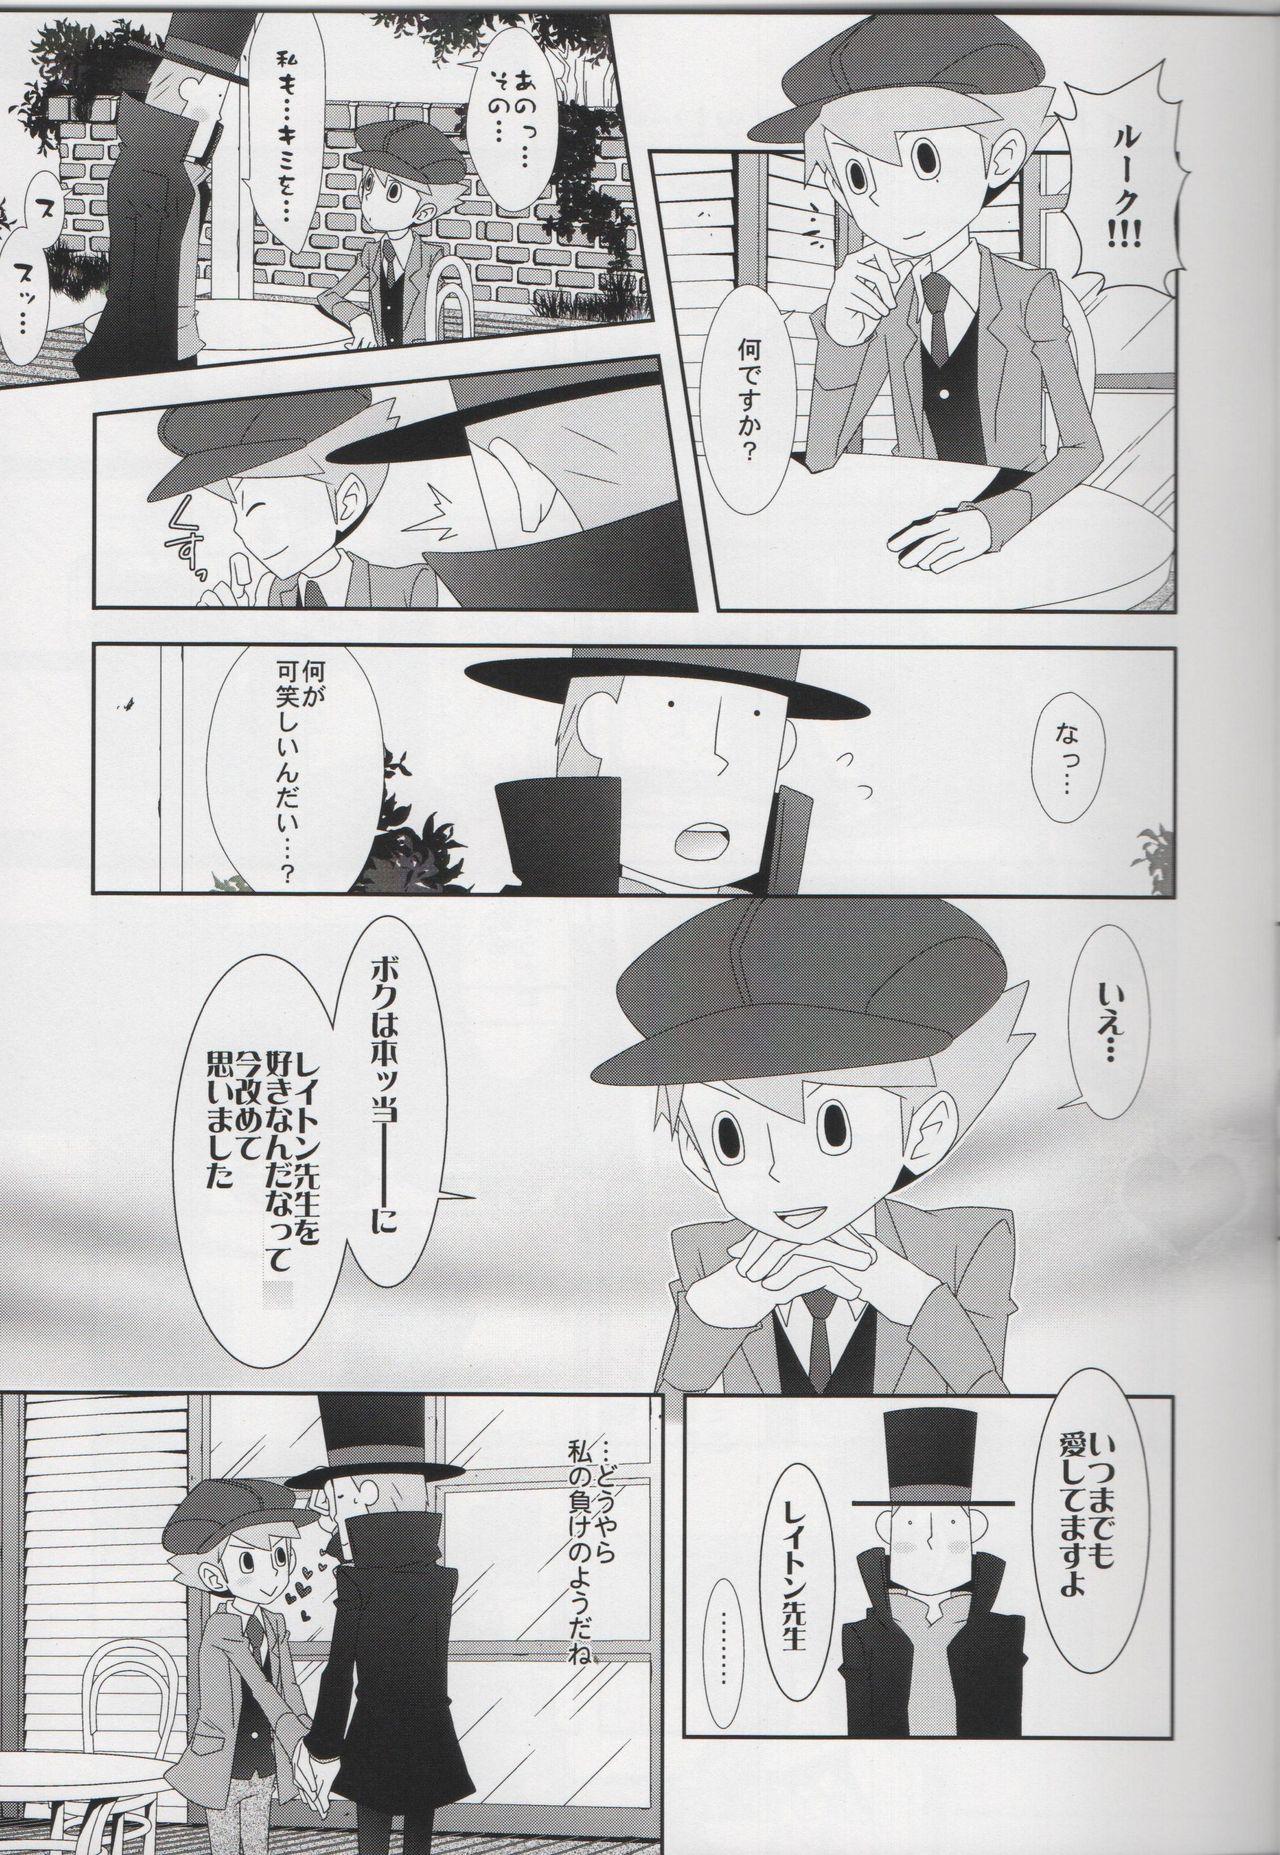 For London Entr'acte - Professor layton Screaming - Page 8